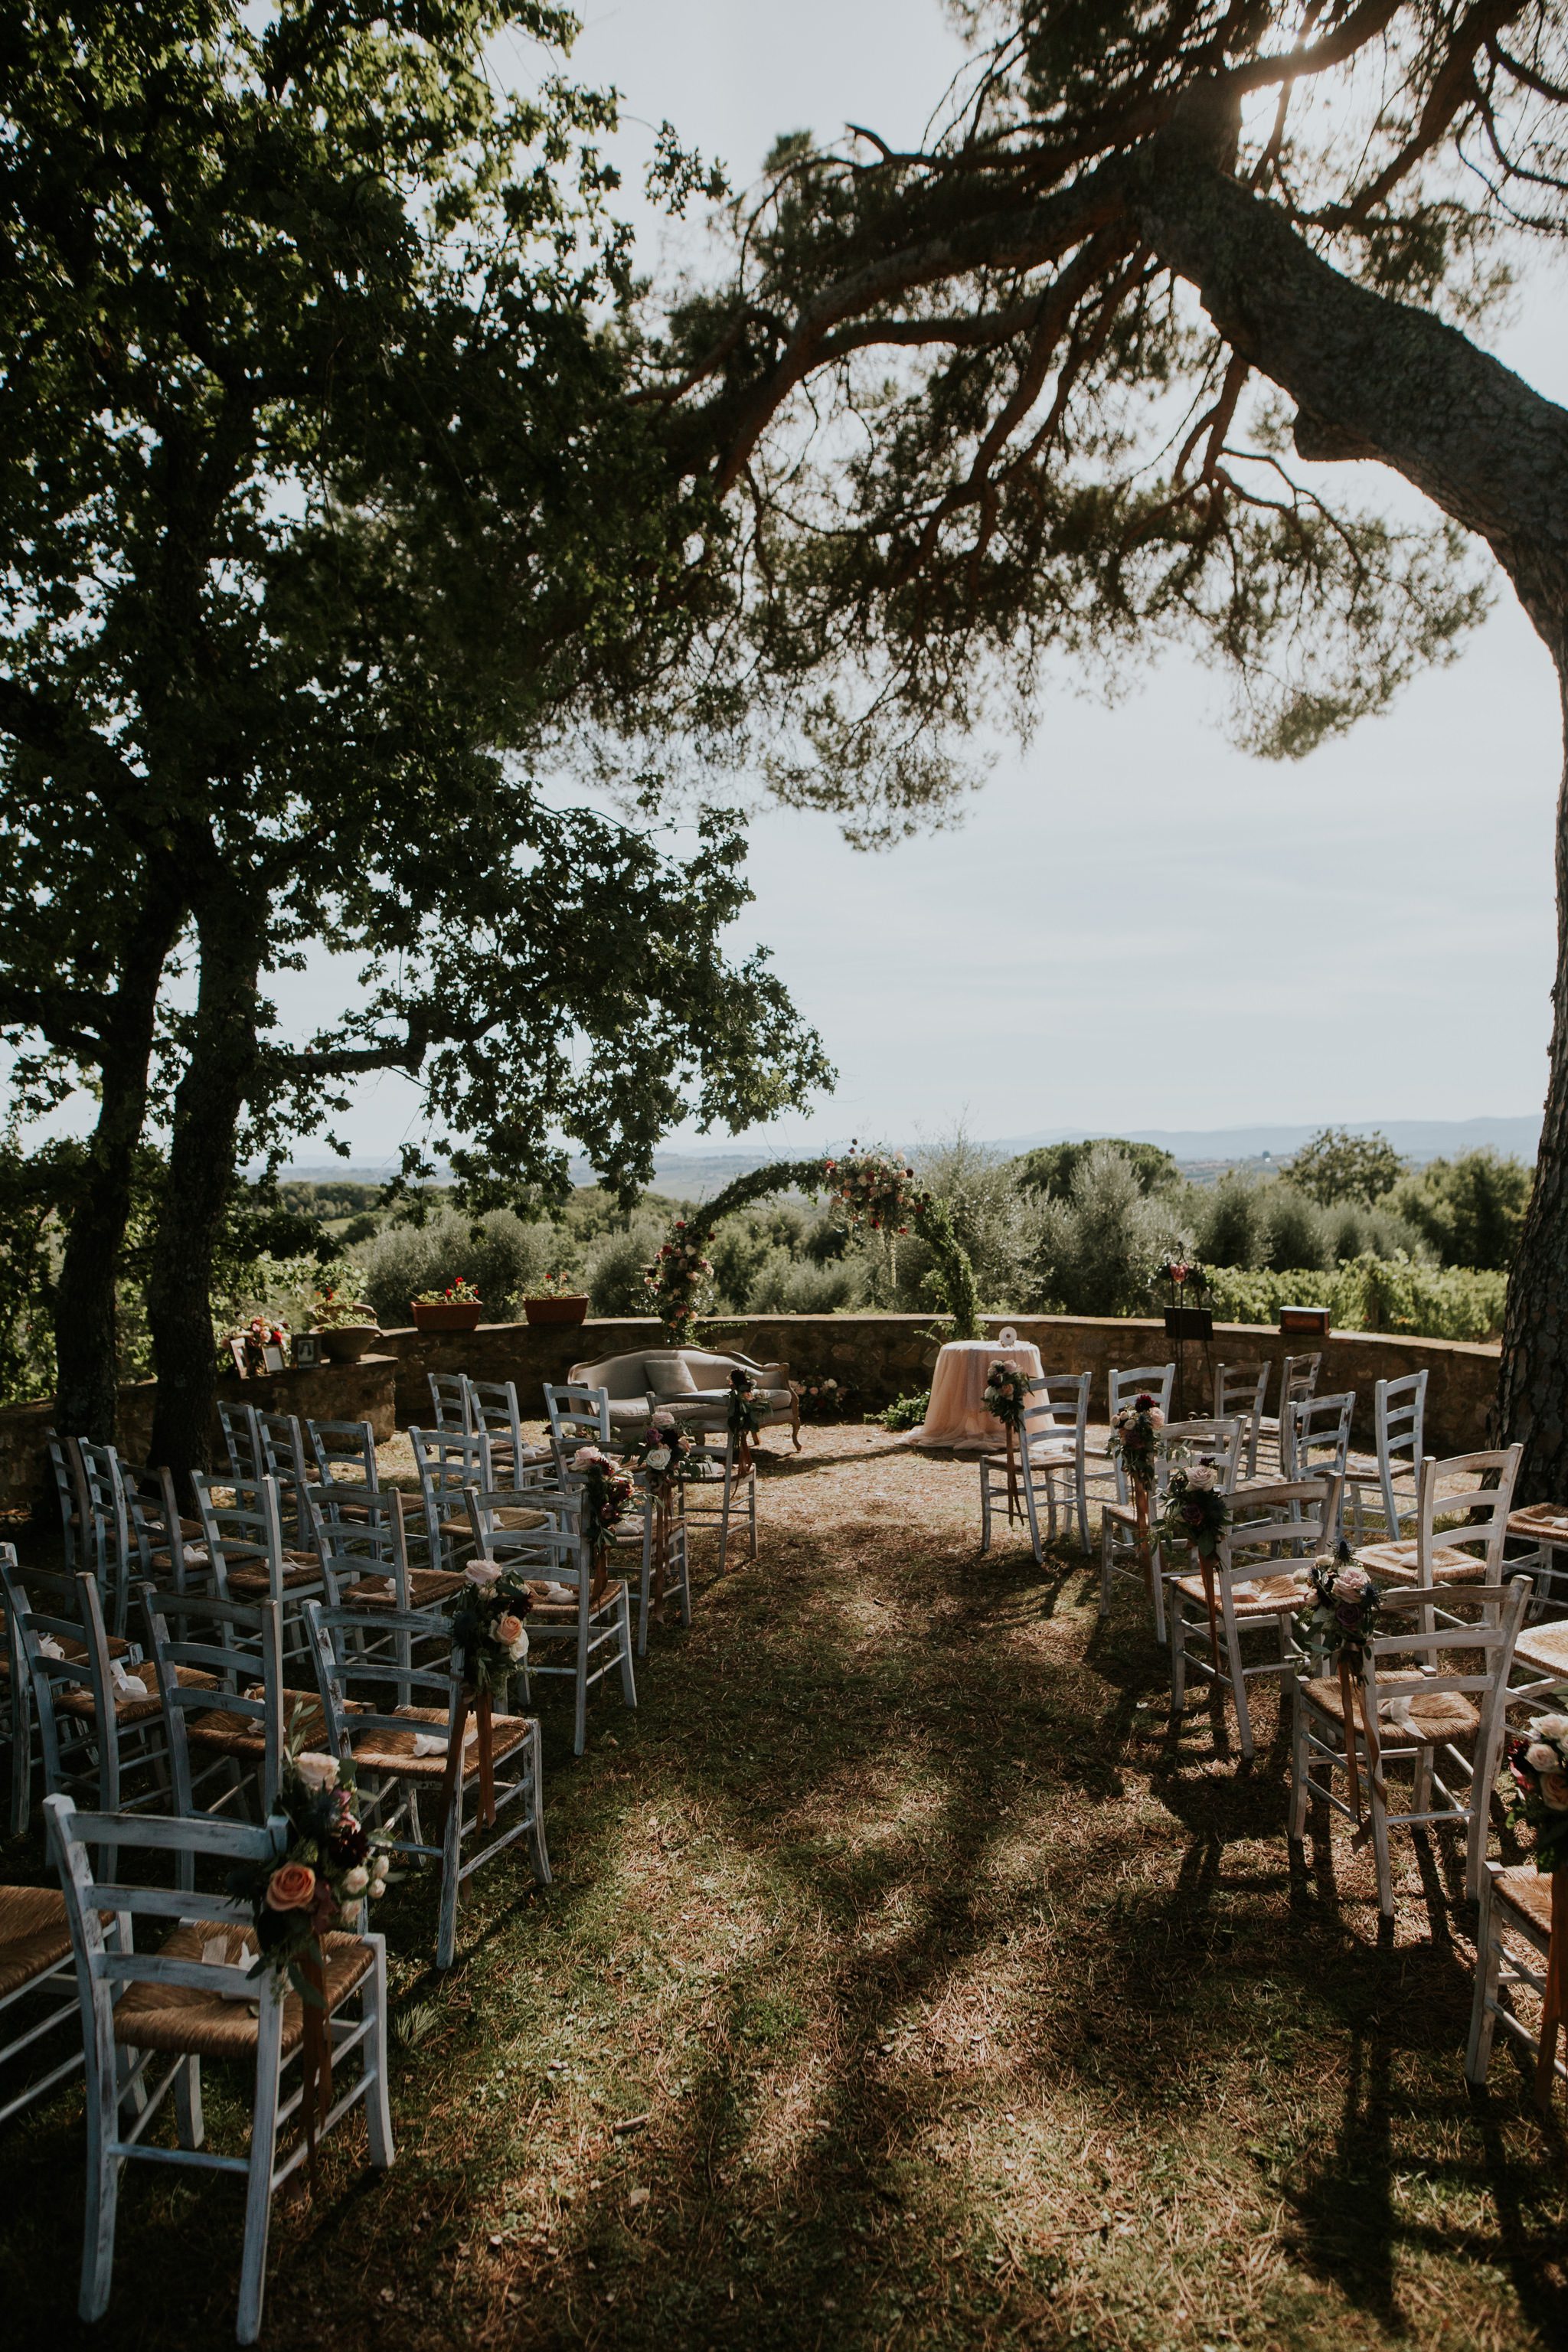 A wedding ceremony space over looking the Tucan hills in Italy